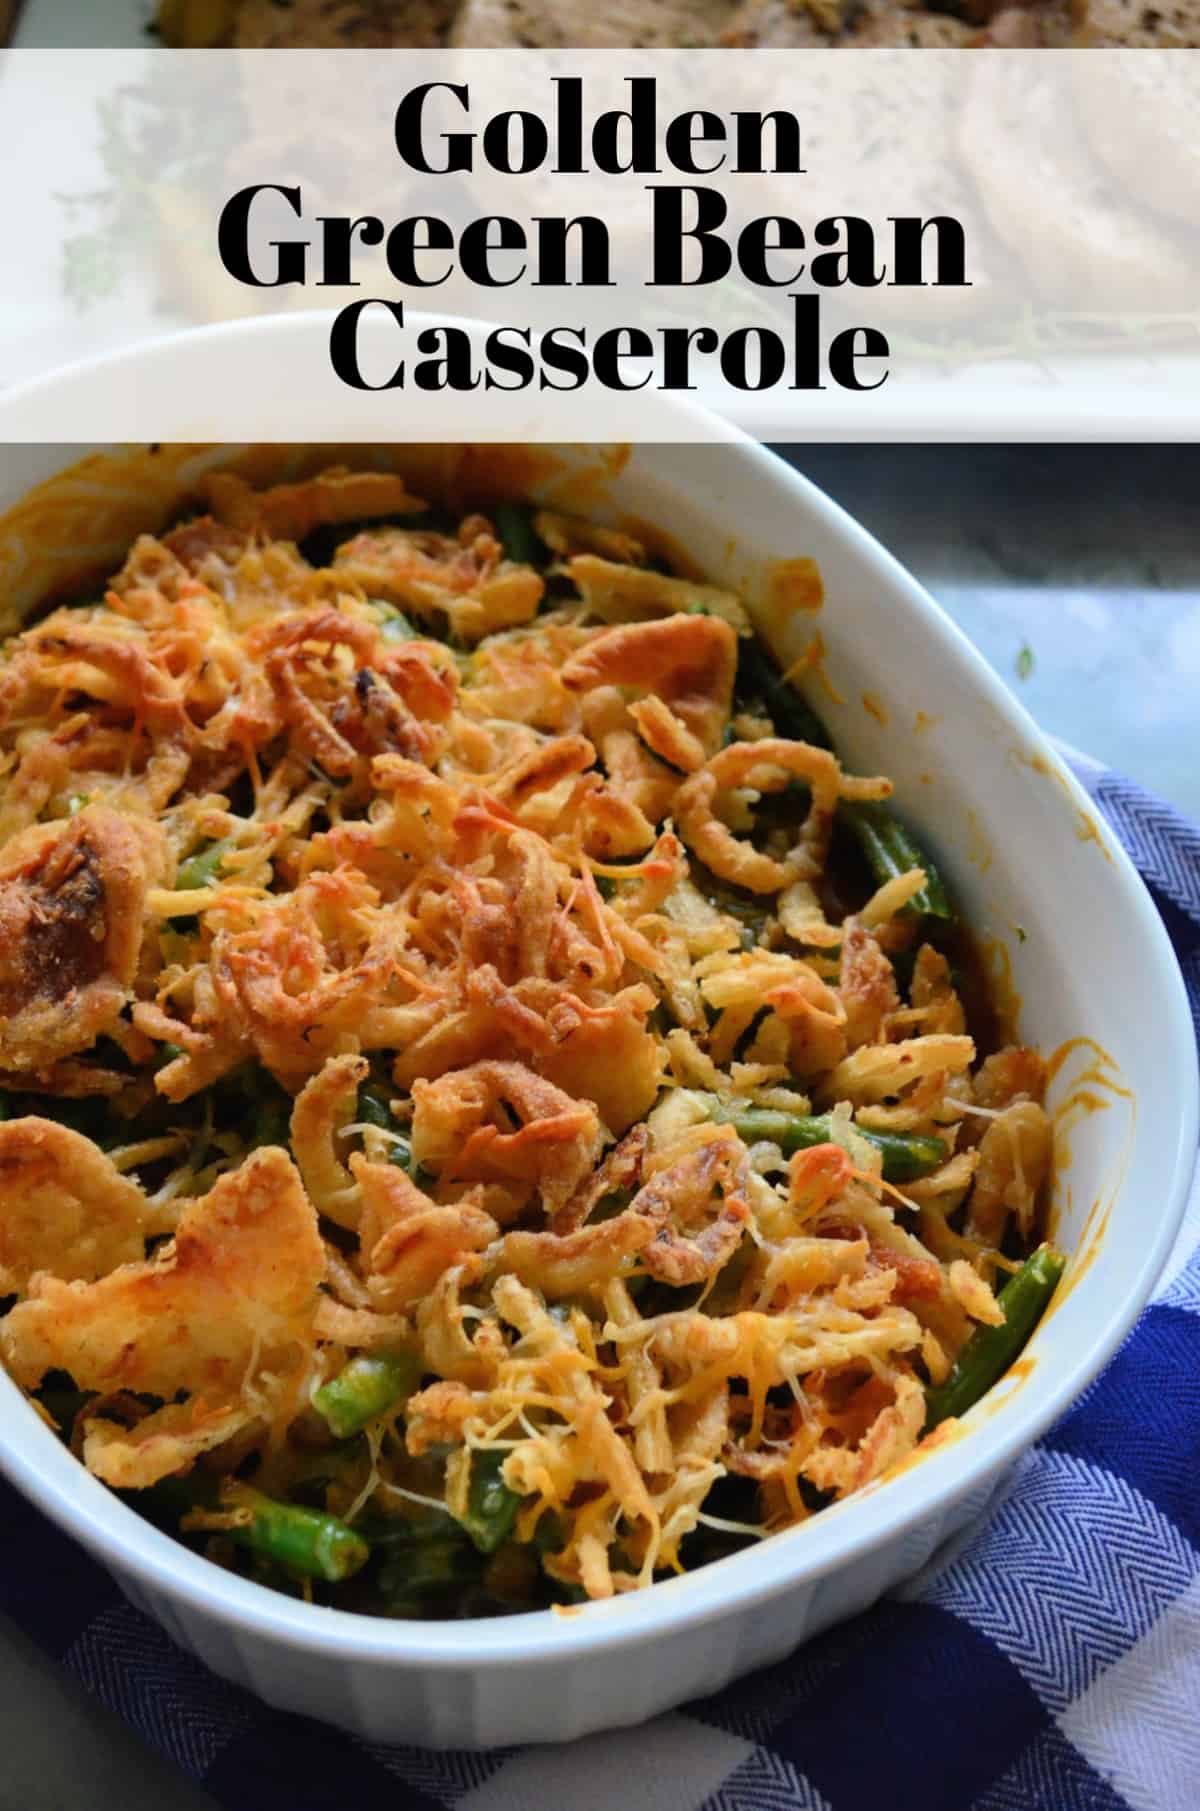 Golden Green Bean Casserole in a white casserole dish with text.